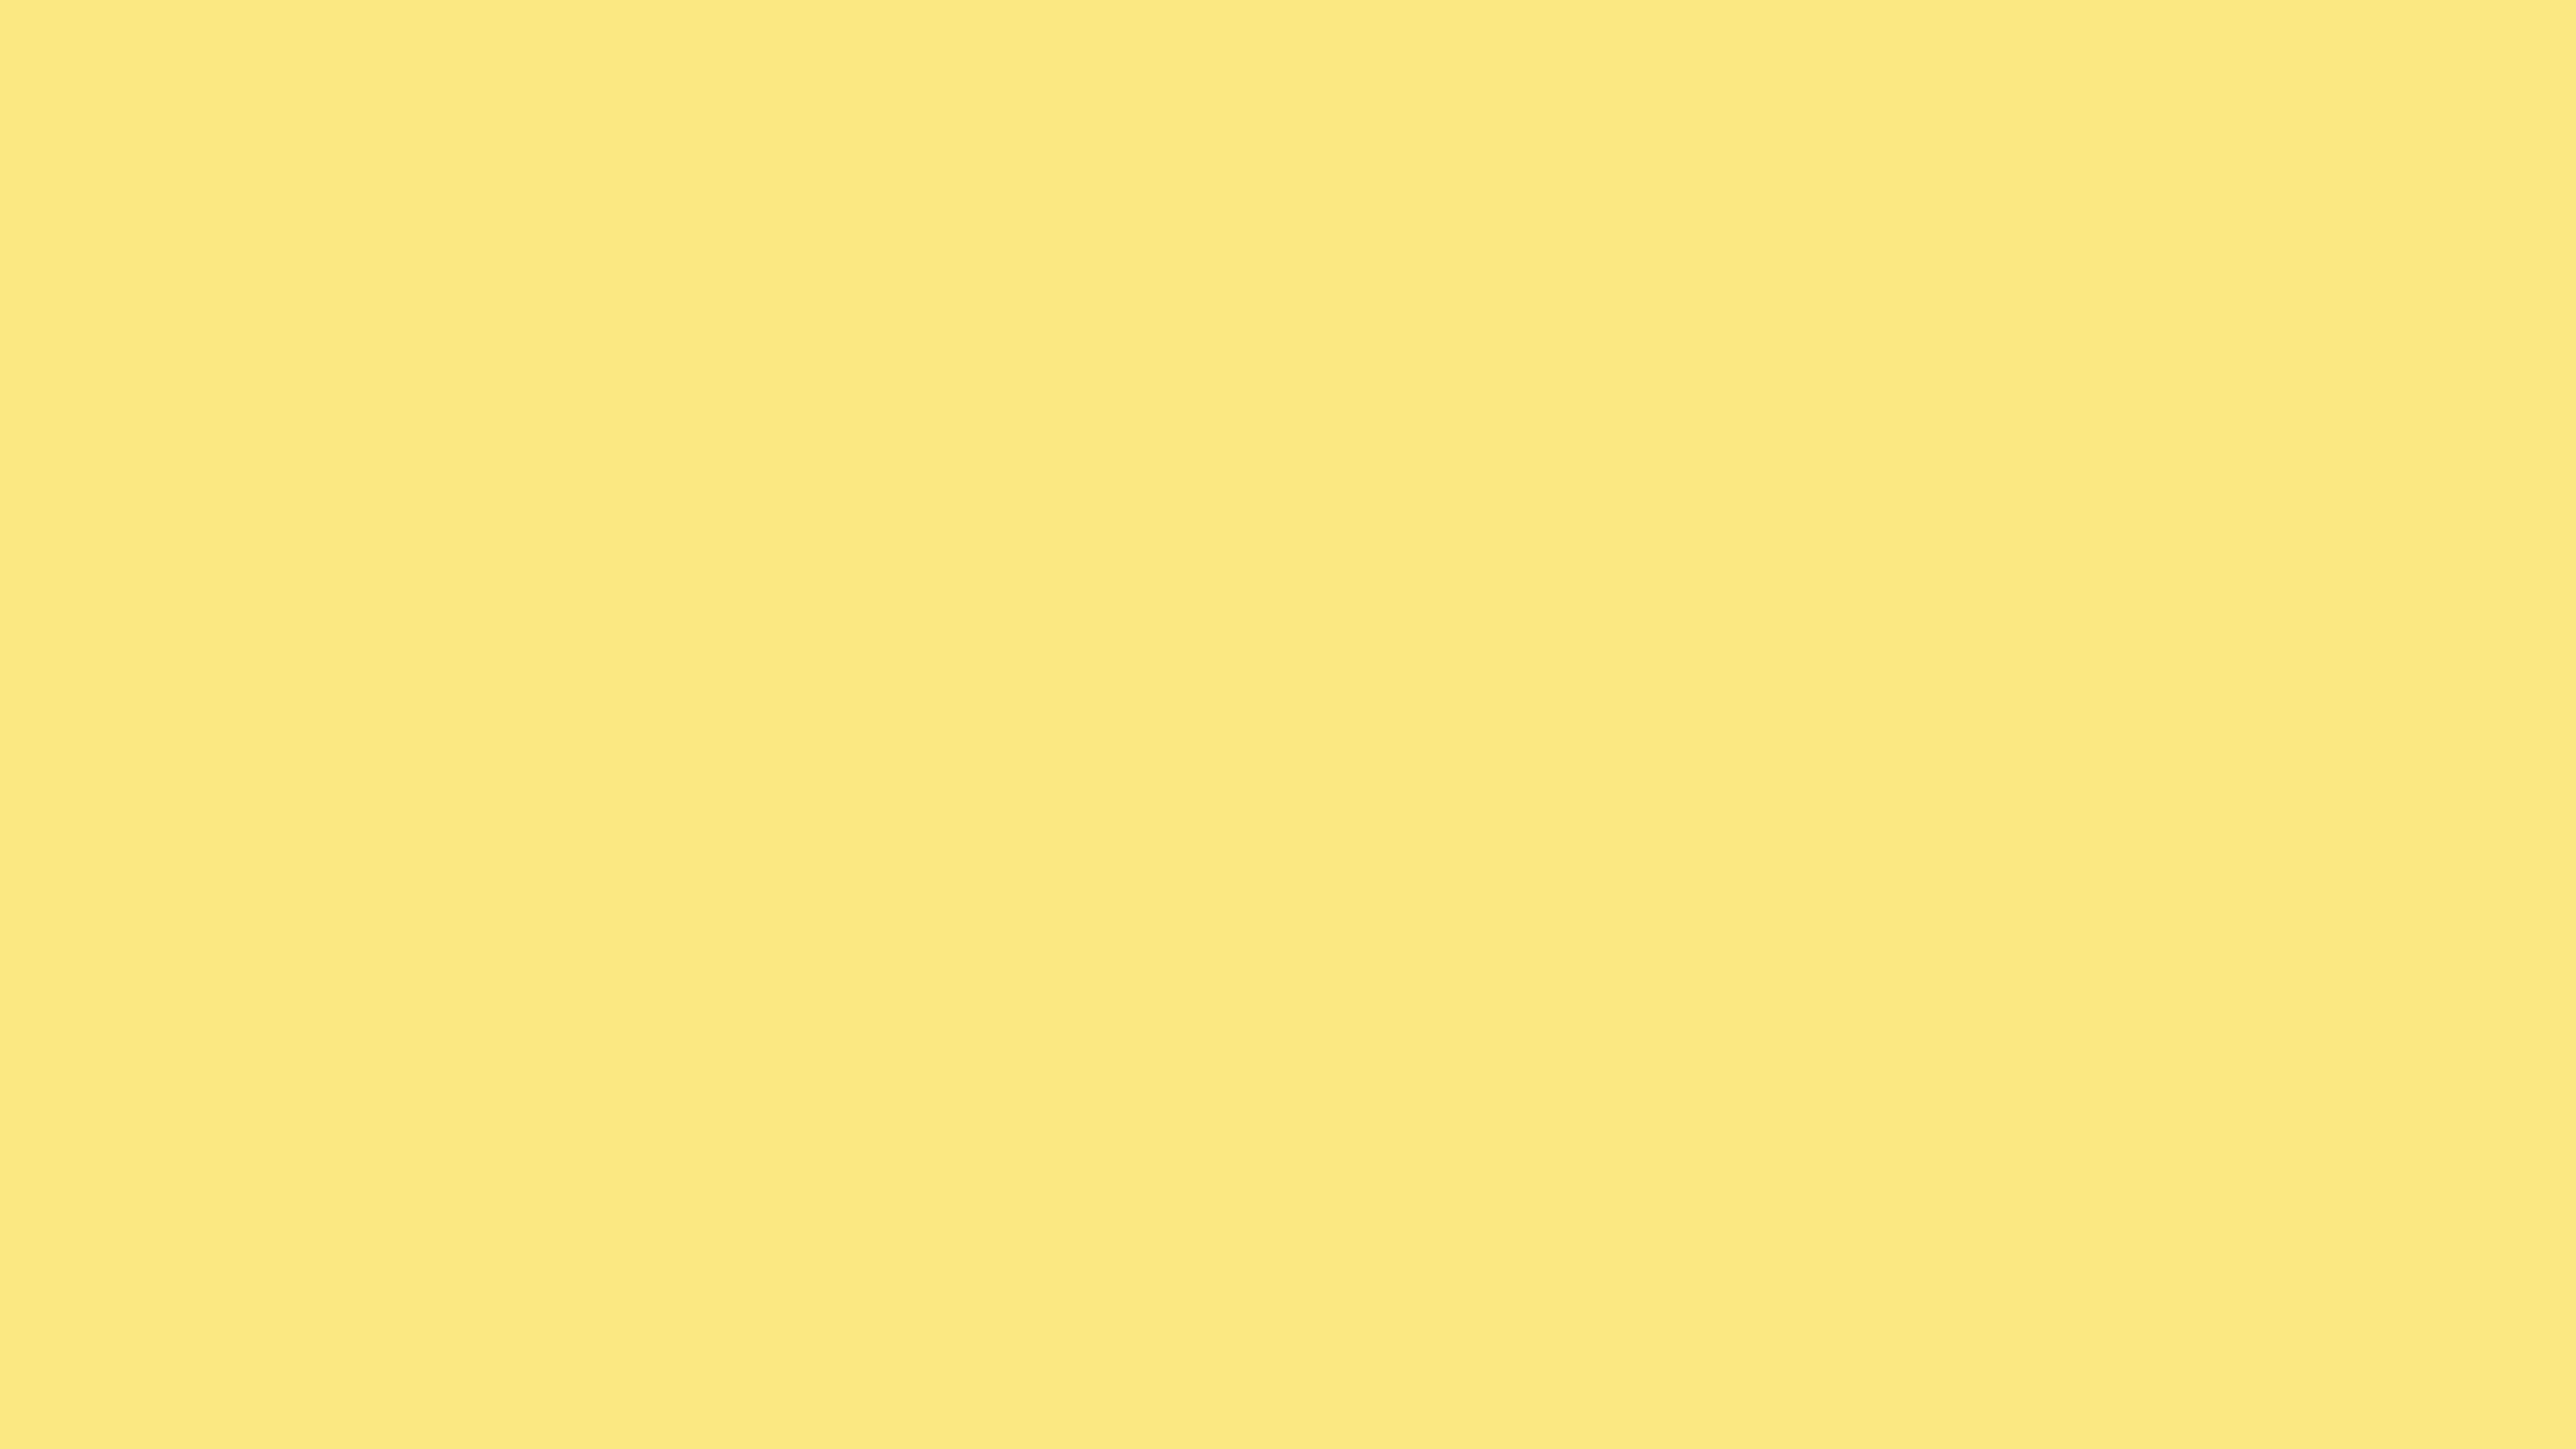 4096x2304 Yellow Crayola Solid Color Background